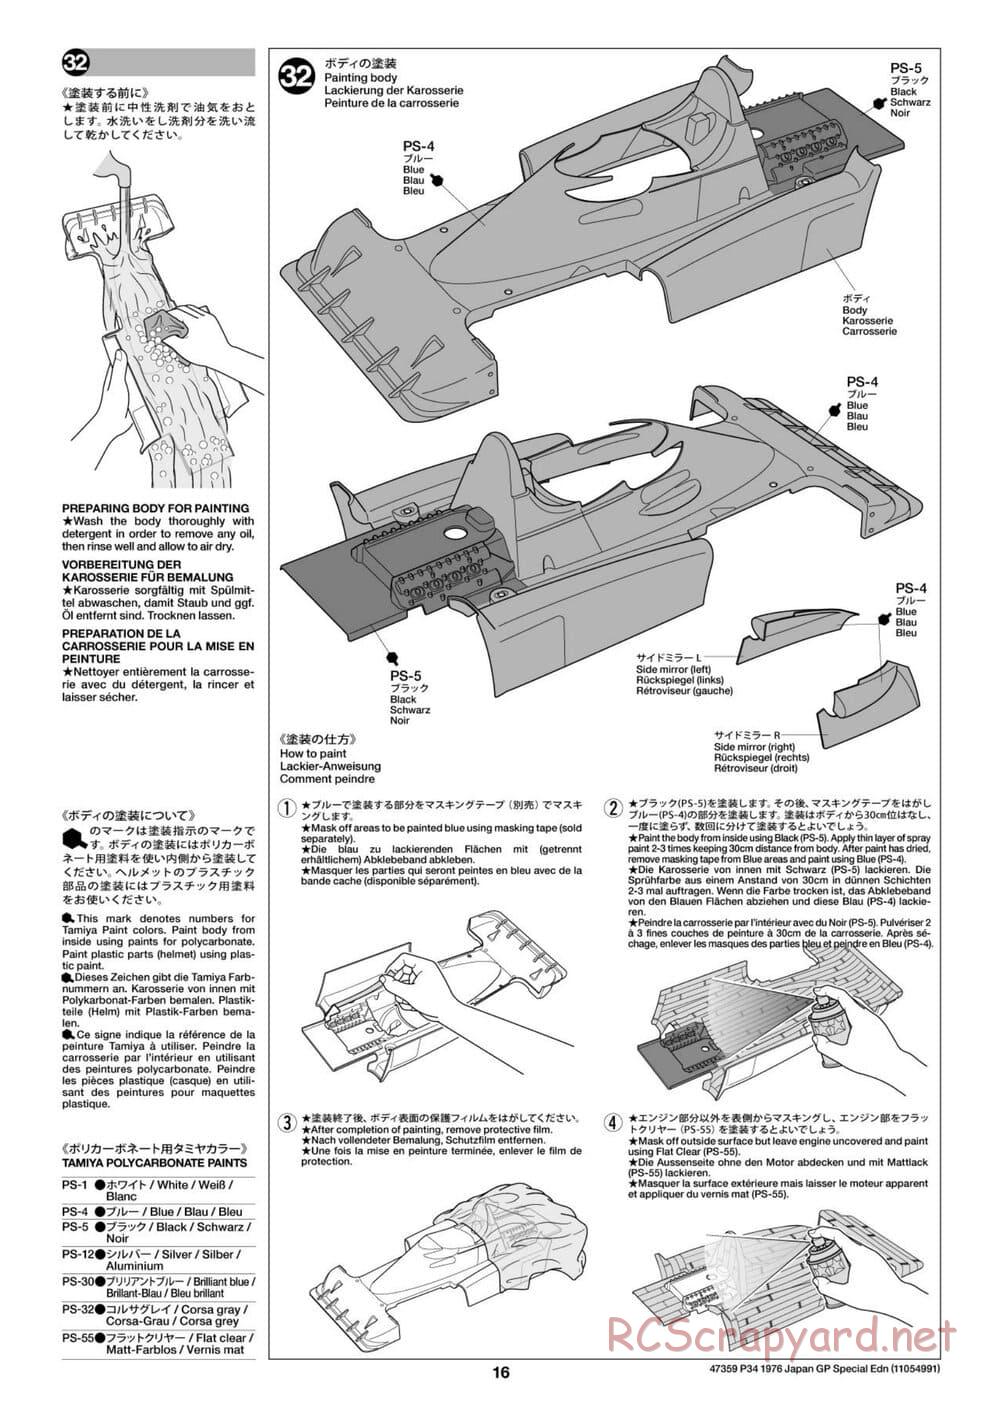 Tamiya - Tyrrell P34 1976 Japan Grand Prix Special - F103-6W Chassis - Manual - Page 16